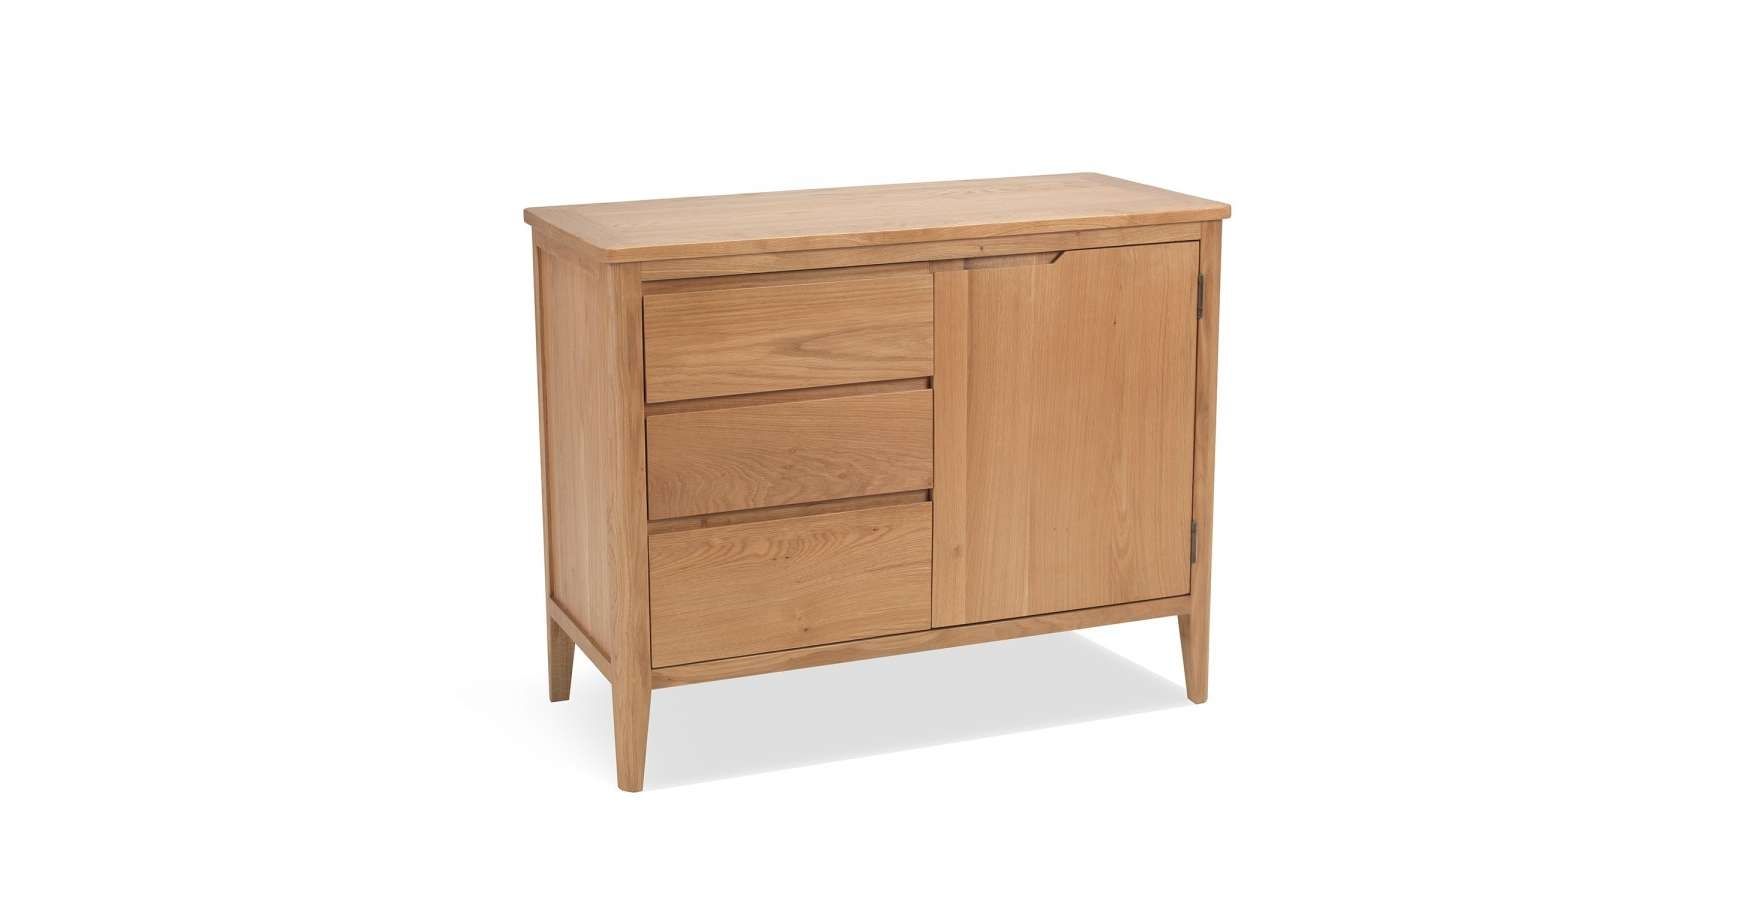 Cadley Oak Small Sideboard With Drawers – Lifestyle Furniture Uk Intended For Sideboards With Drawers (View 3 of 20)